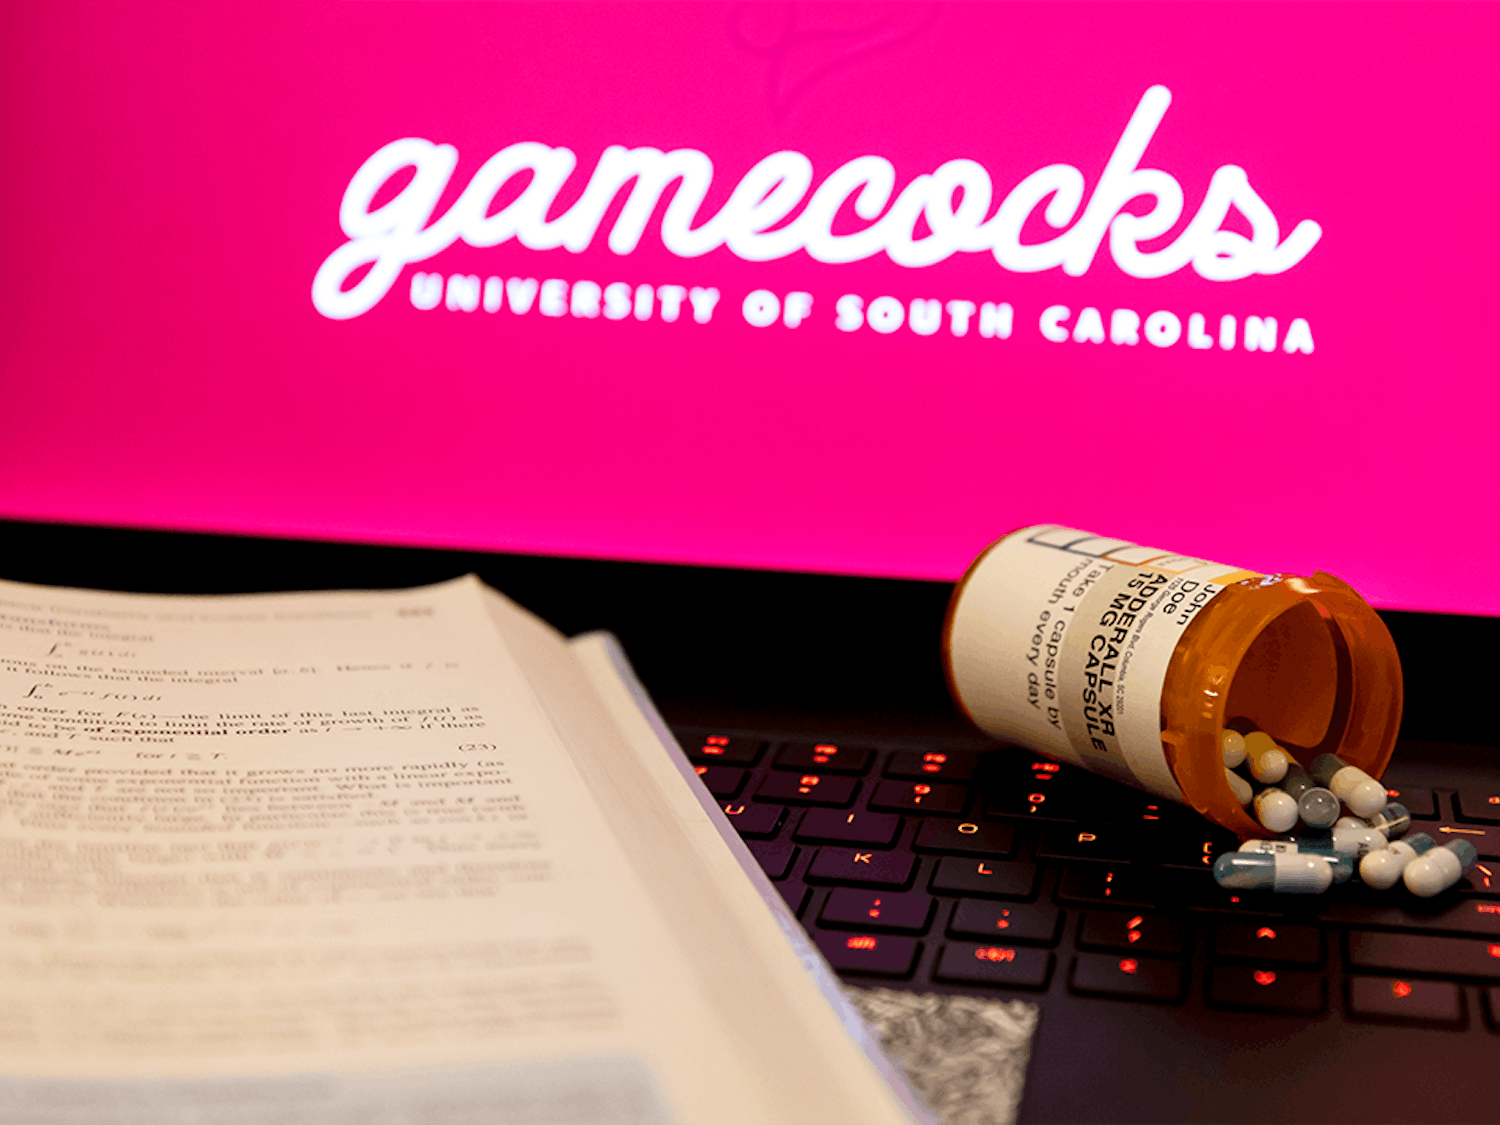 A textbook and bottle of Adderall spilled on the keyboard of a laptop. Adderall is a prescribed drug used to increase attentiveness and to help stay focused on tasks.